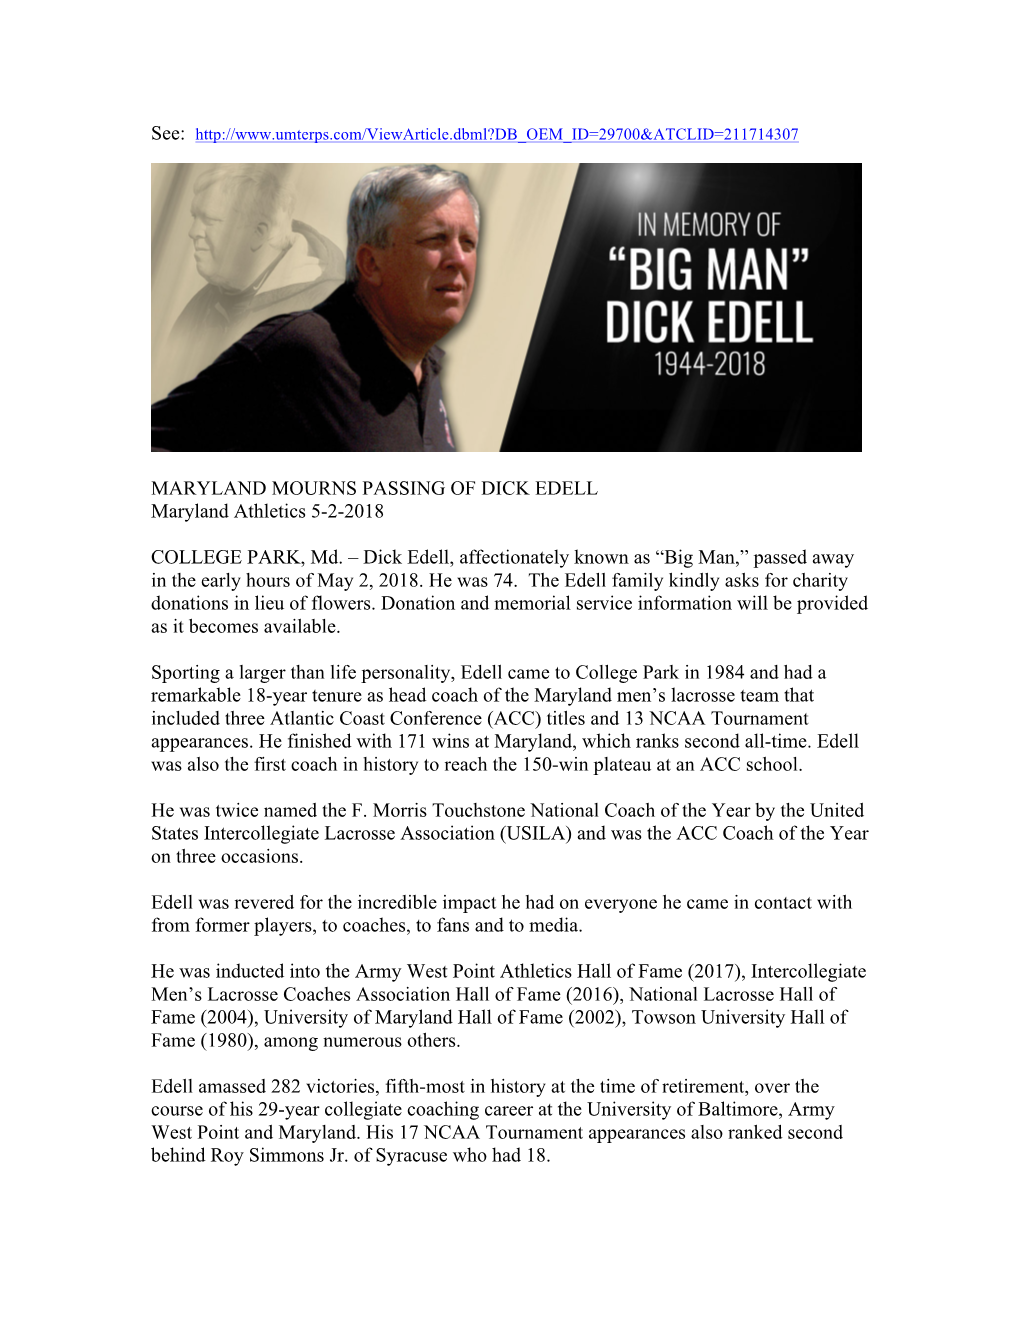 Dick Edell, Affectionately Known As “Big Man,” Passed Away in the Early Hours of May 2, 2018